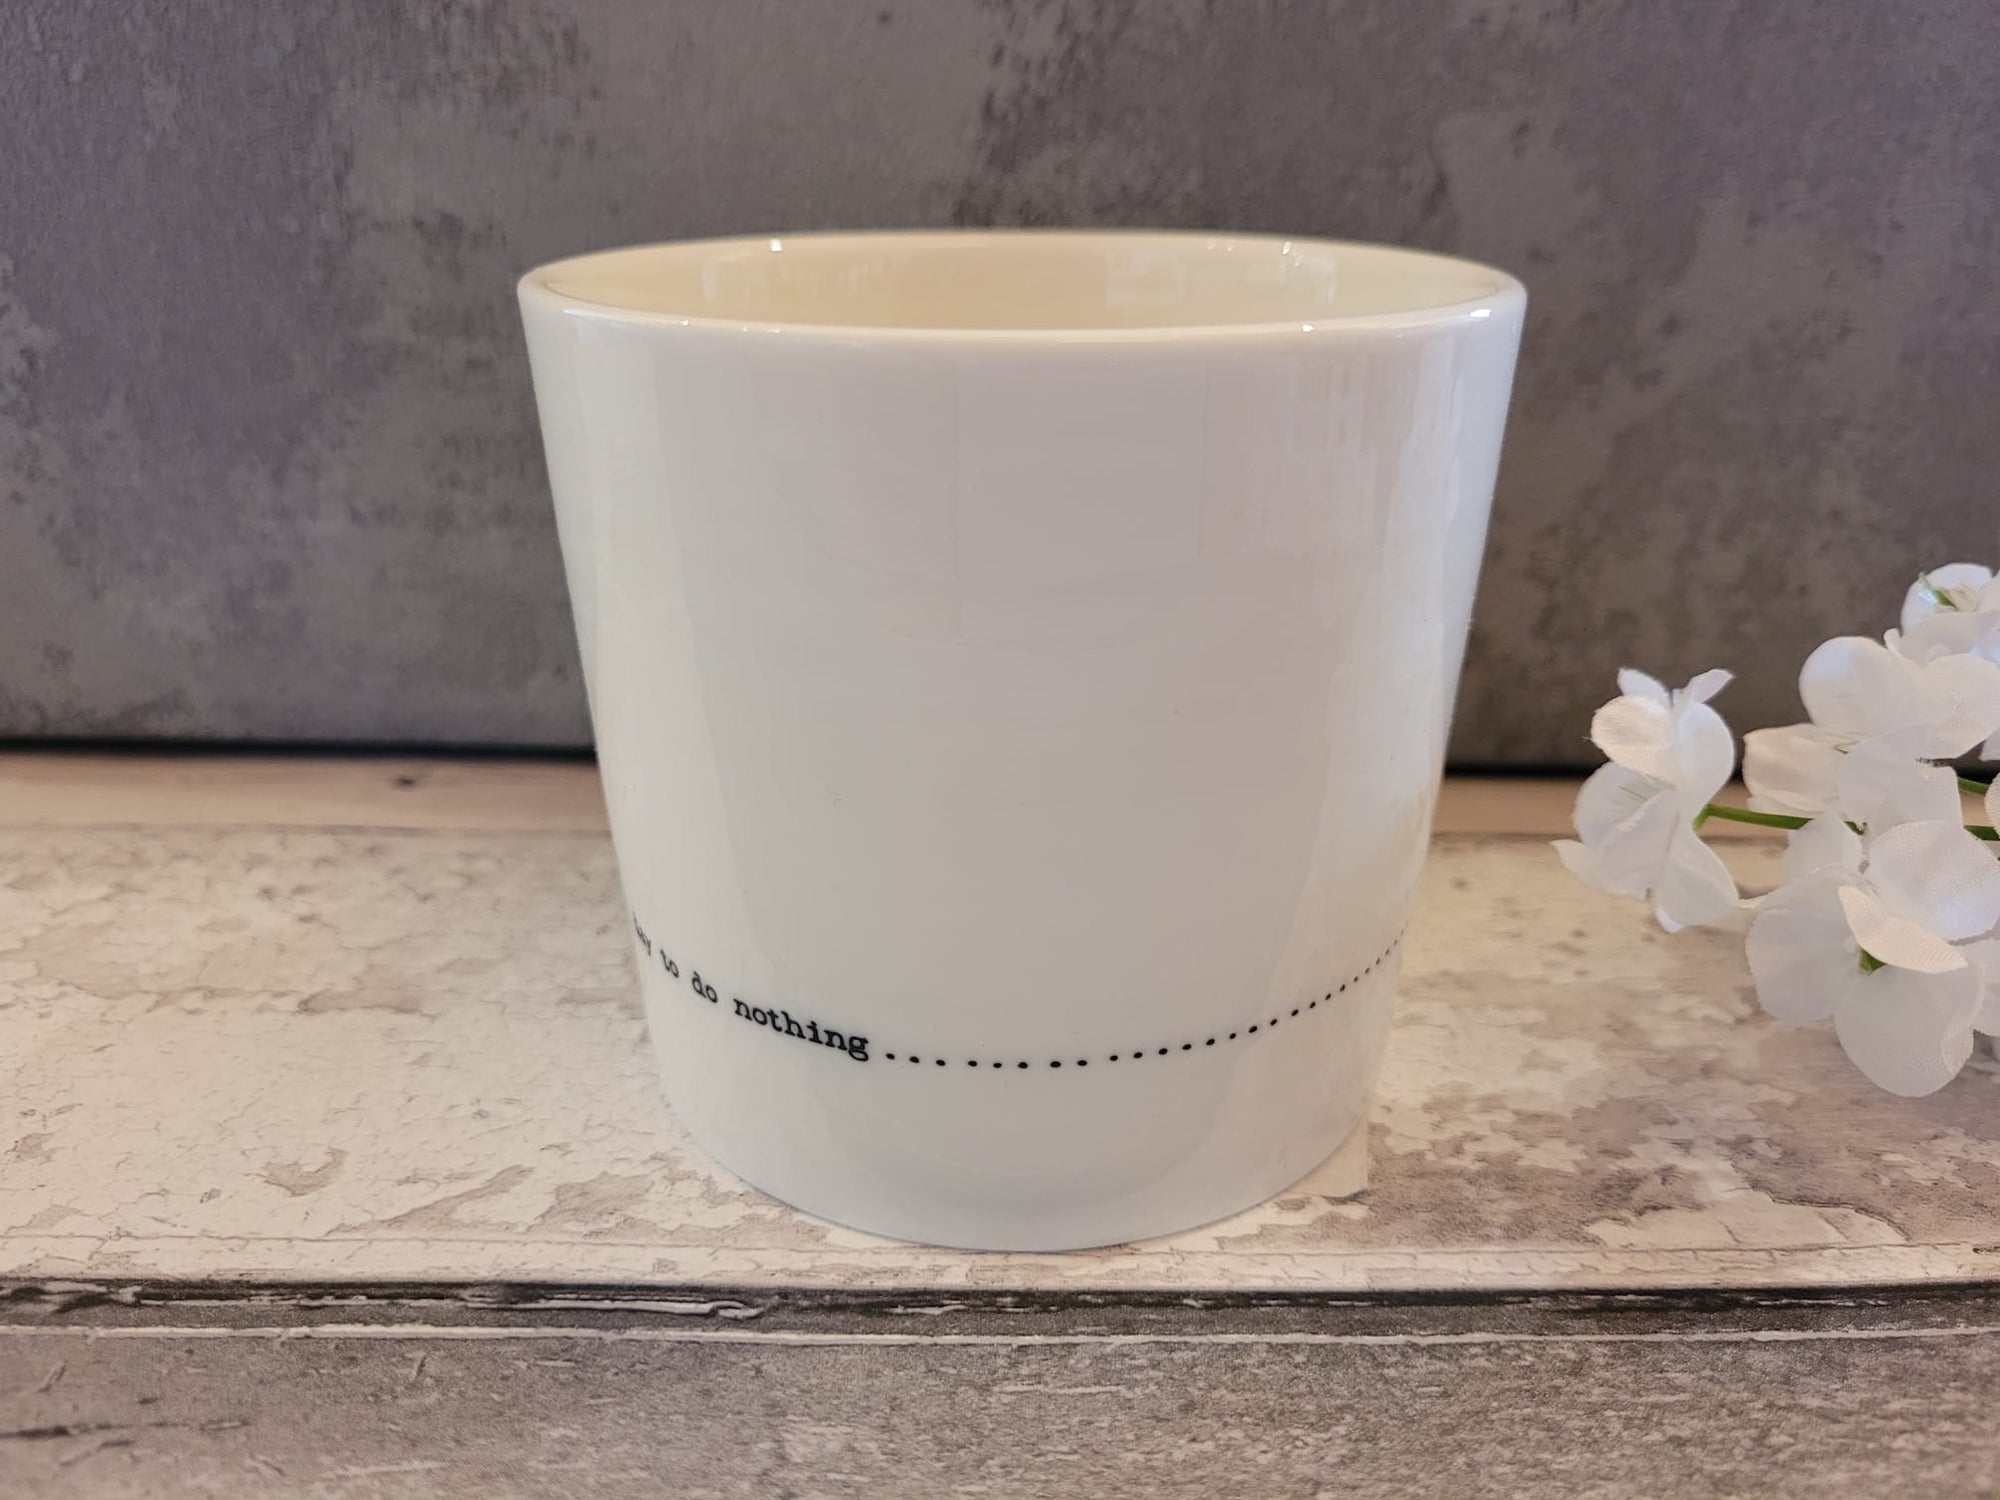 East of India - ‘Wobbly’ Porcelain Mug - It's a perfect day to do nothing…